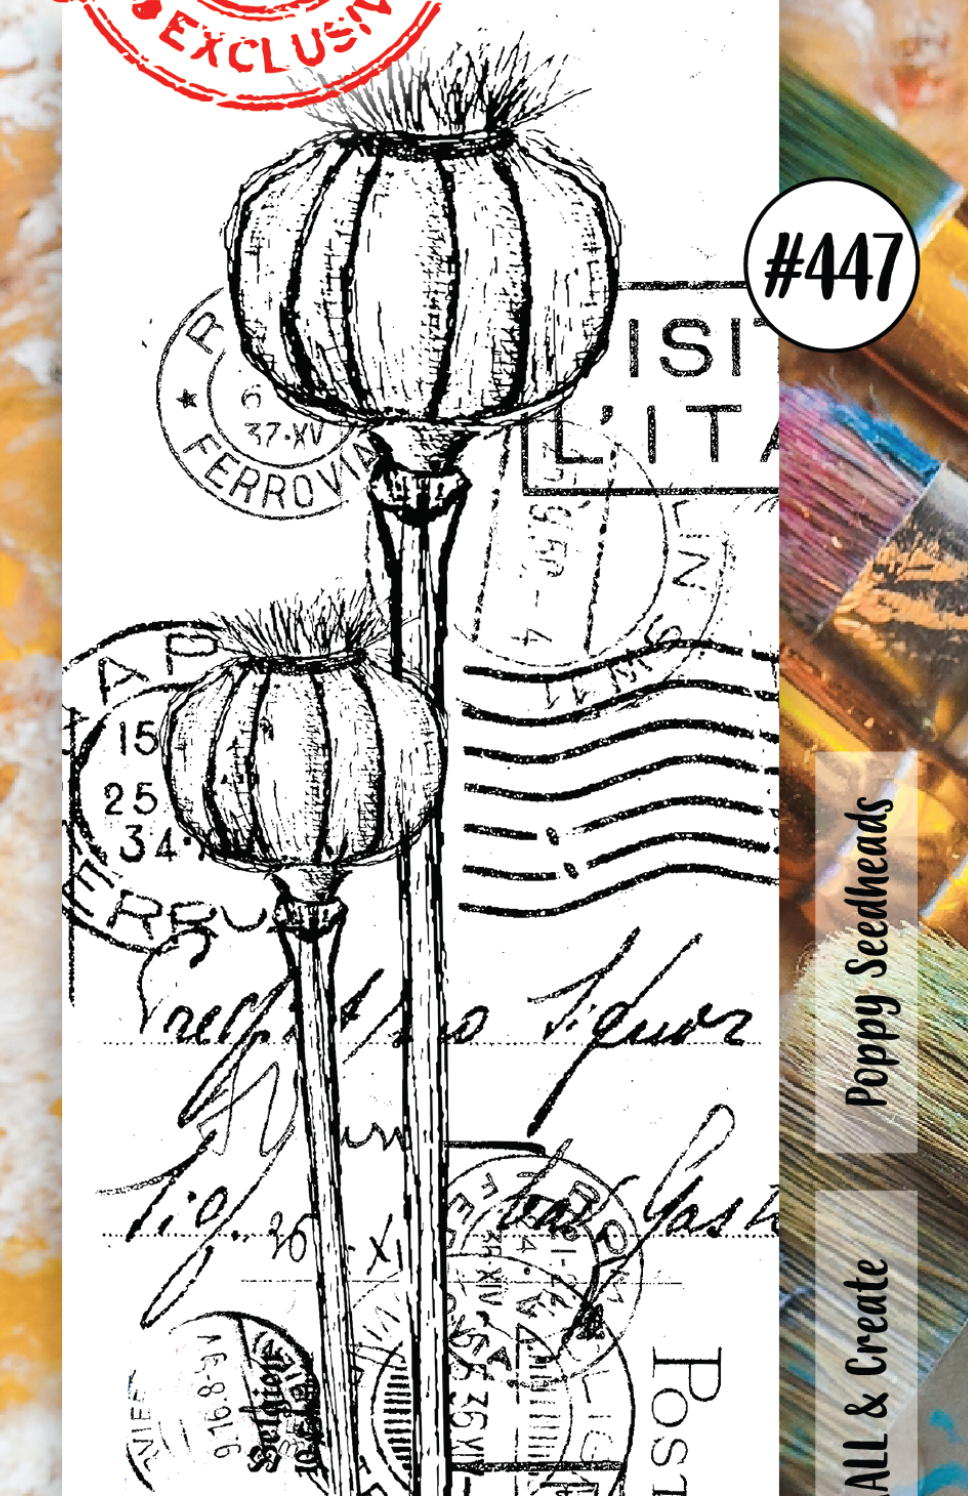 Aall and Create - Poppy Seedheads - Border Stamp - Designer Tracy Evans - Clear Stamp - #447